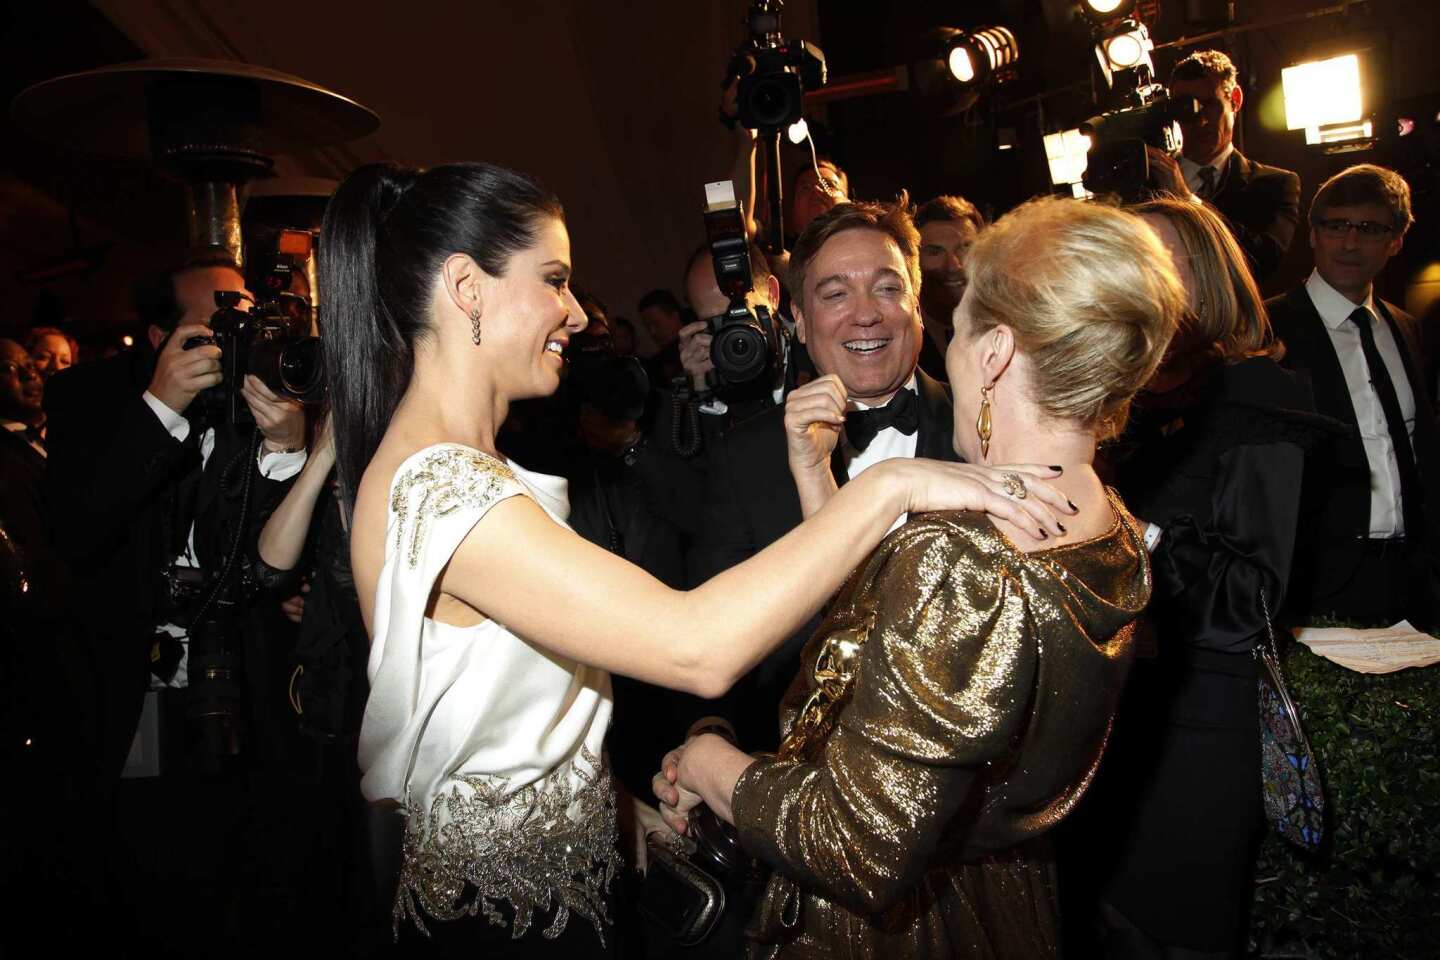 The two lead actresses meet.